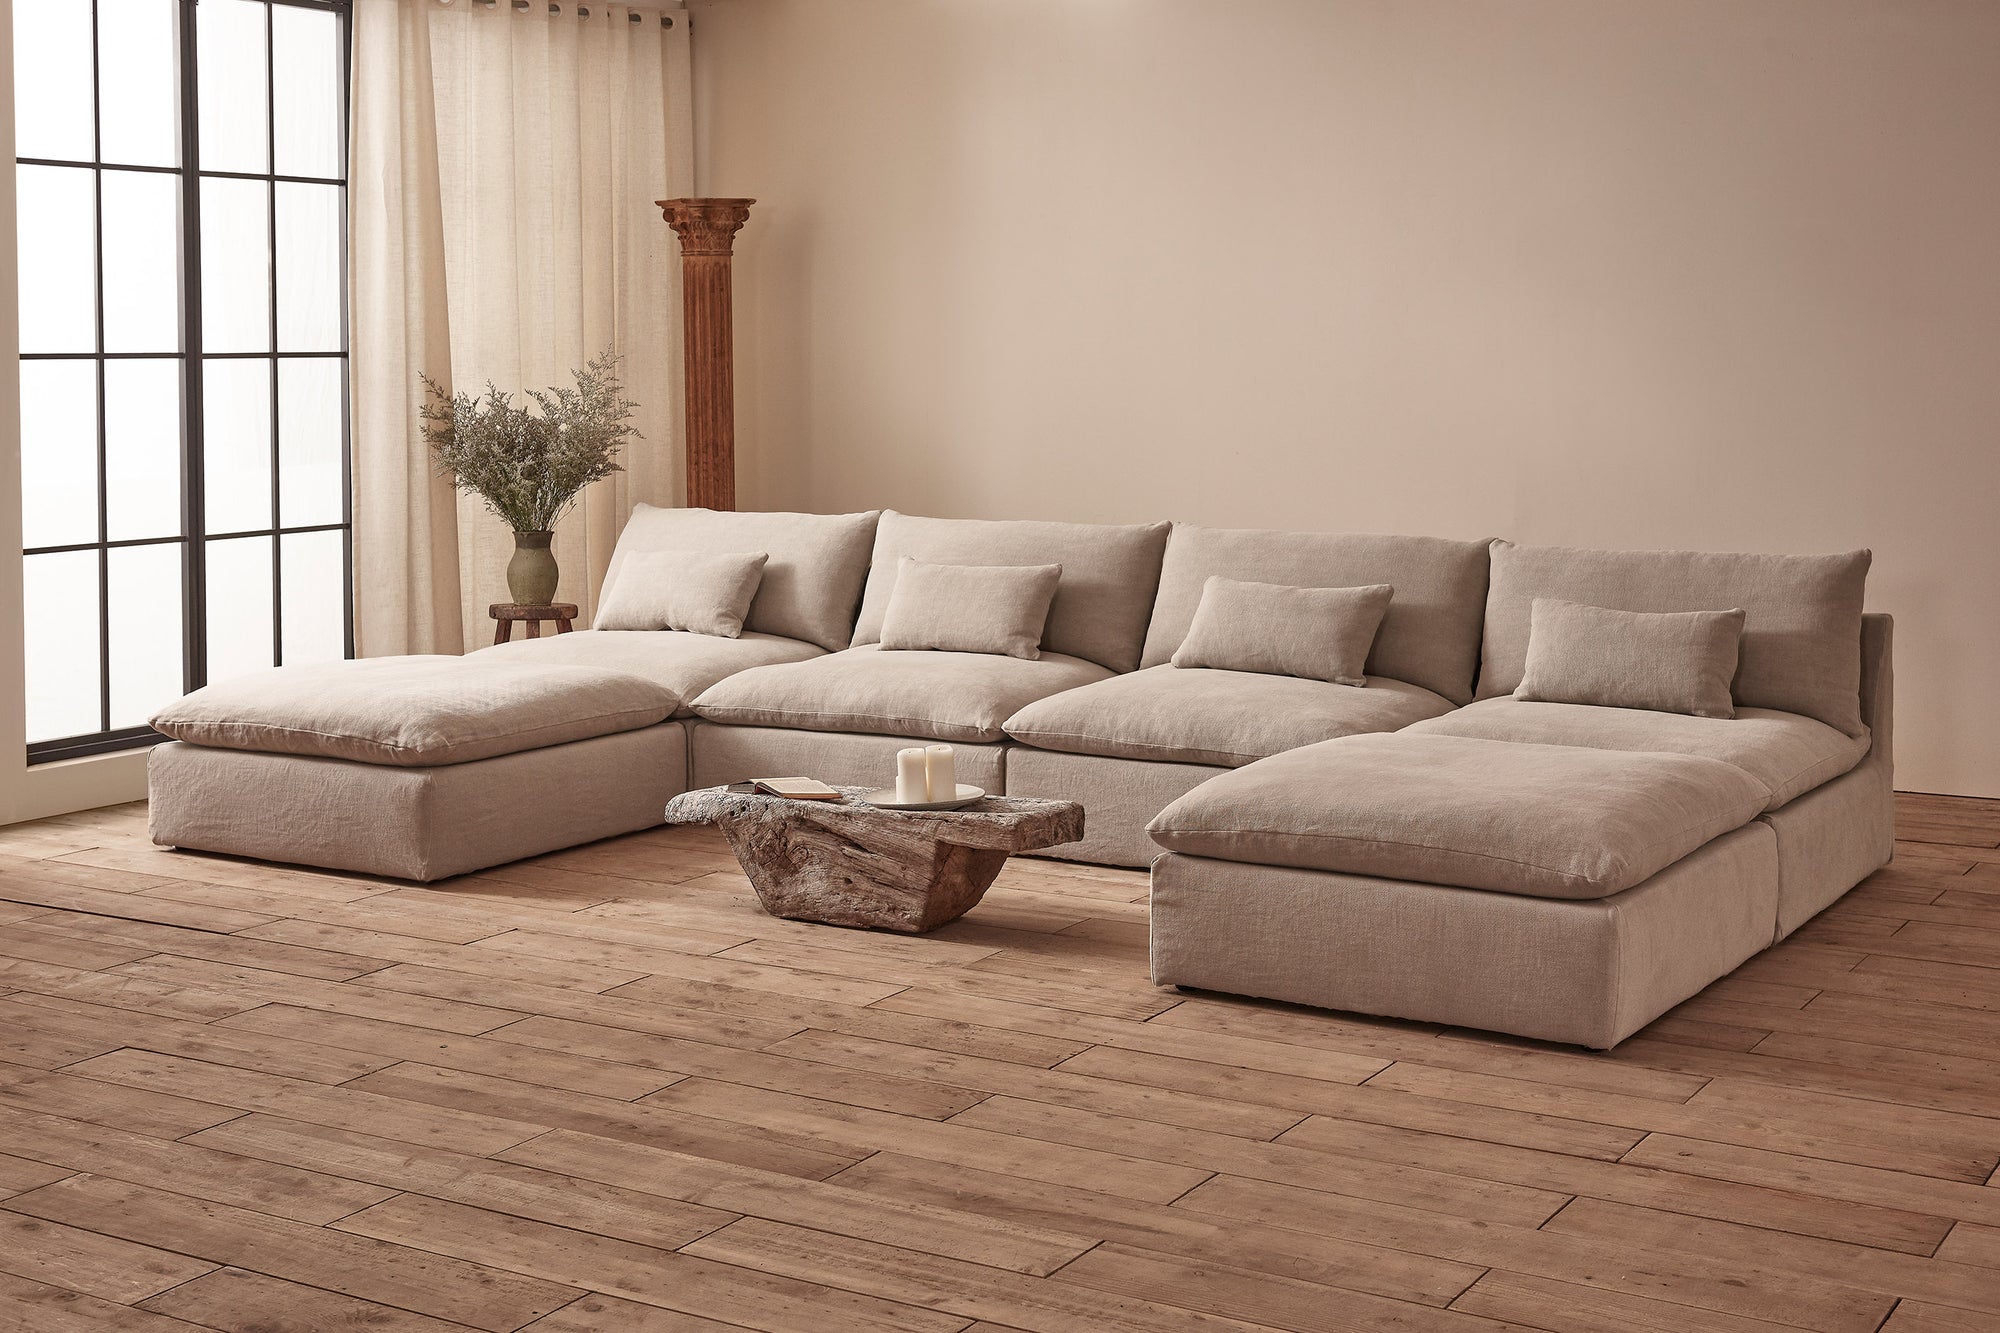 Aria U-Shape Sectional Sofa in Jasmine Rice, a light warm greige Medium Weight Linen, placed in a sunlit room with a coffee table and a vase on top of a stool